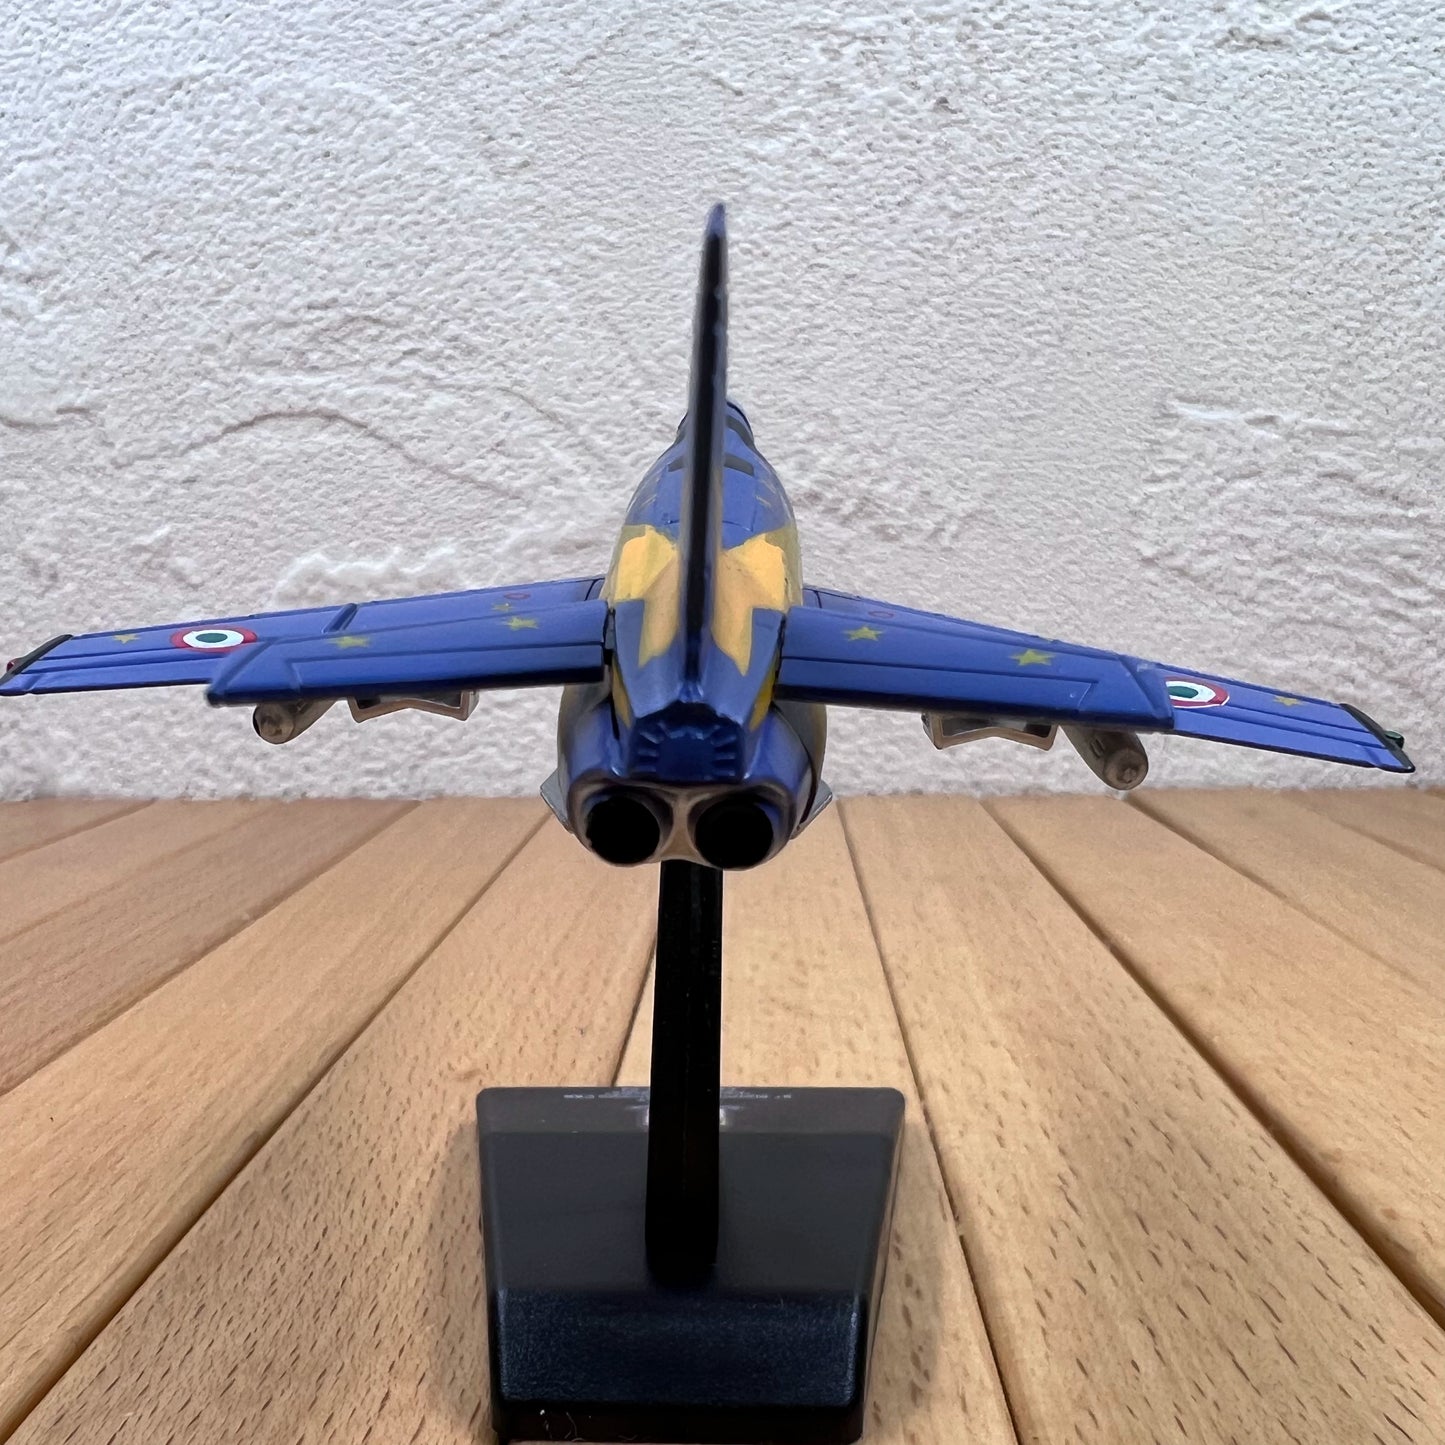 1/100 Scale 1983 Fiat G.91Y Jet Fighter Diecast Aircraft Model